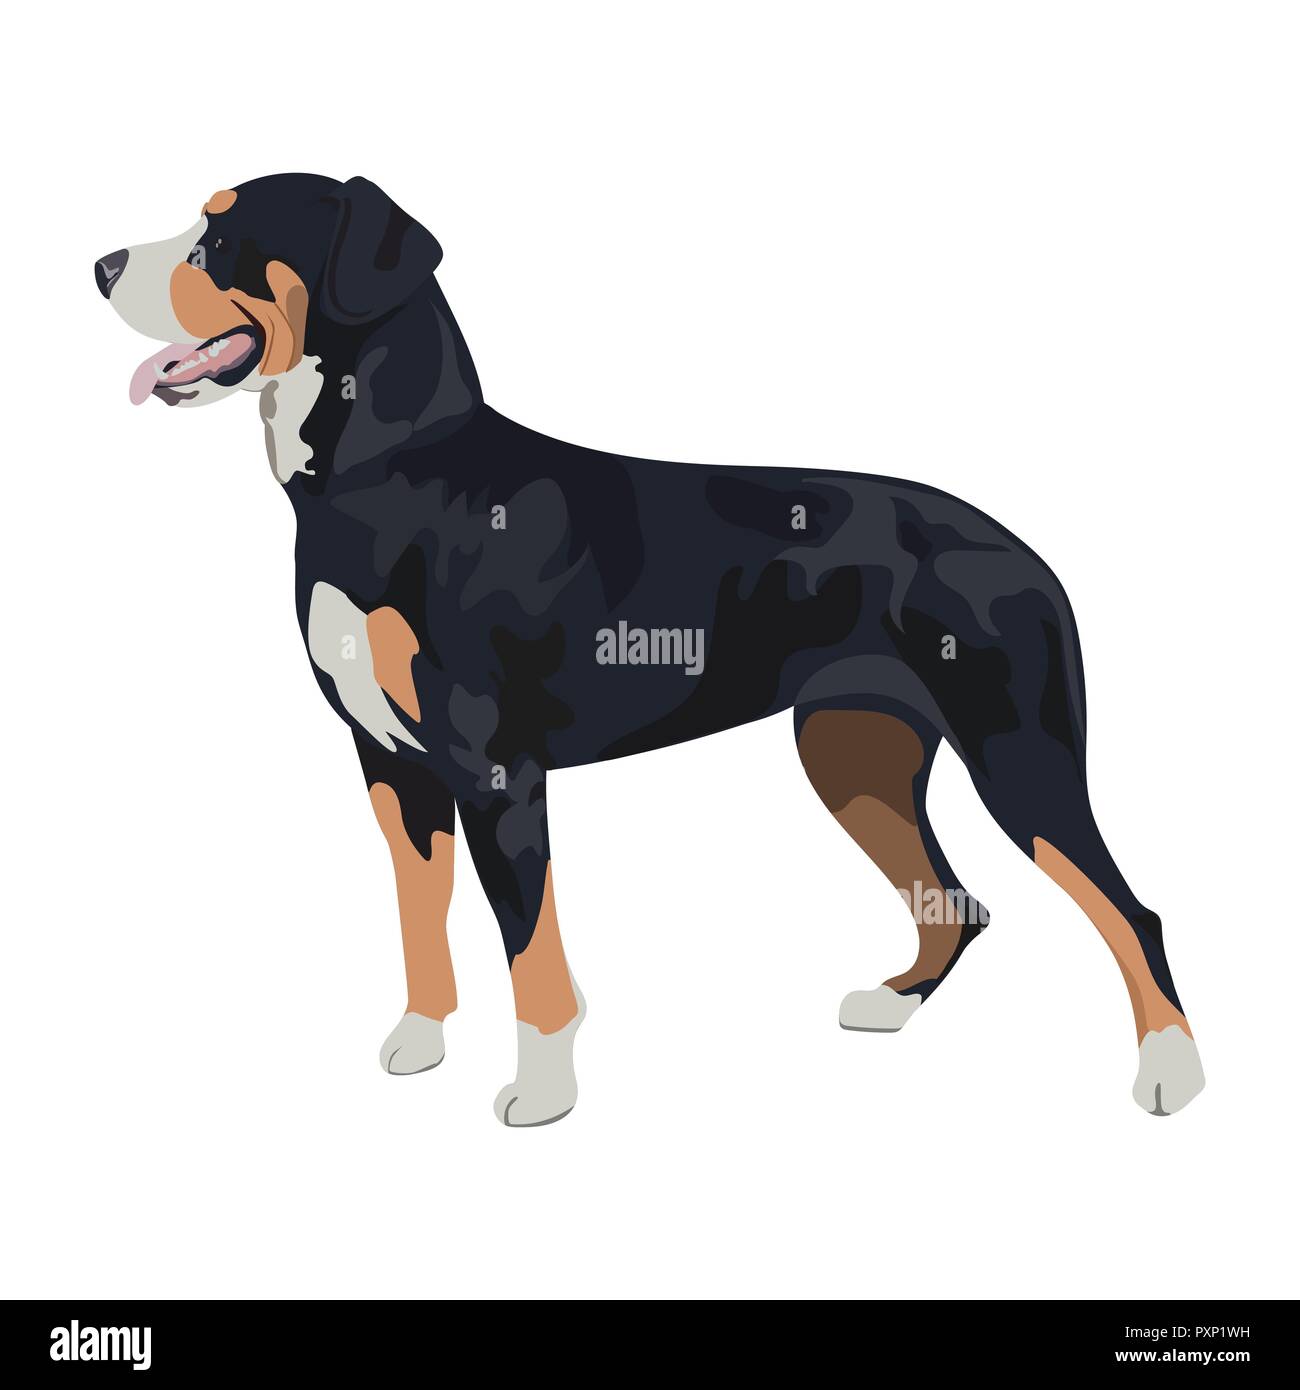 Swiss mountain dog isolated on white background. Purebred black tricolor dog panting. Popular swiss dog breed for your design. Stock Vector